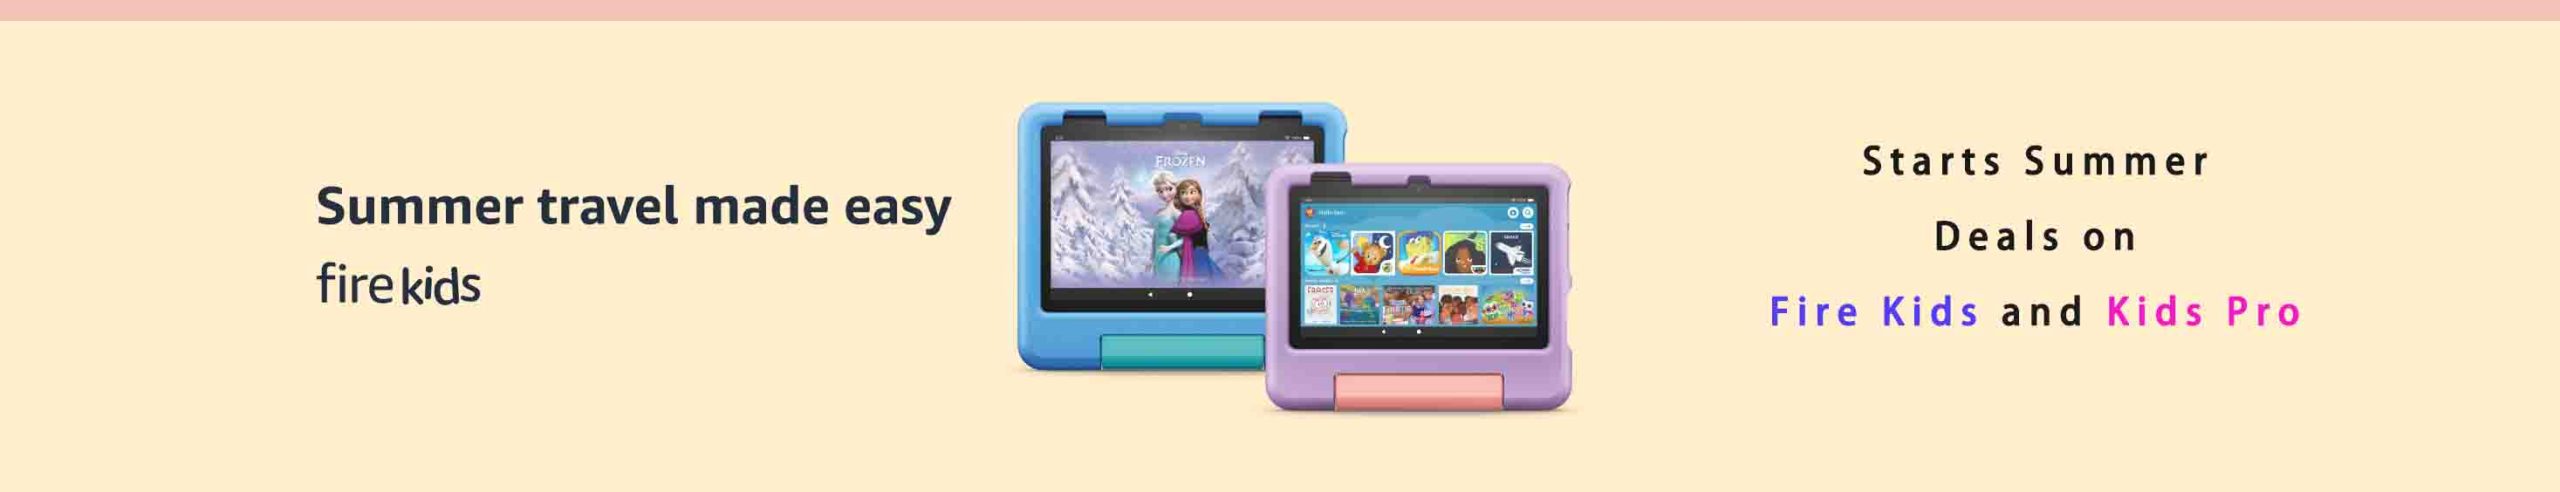 Fire Kids and Kids Pro tablets